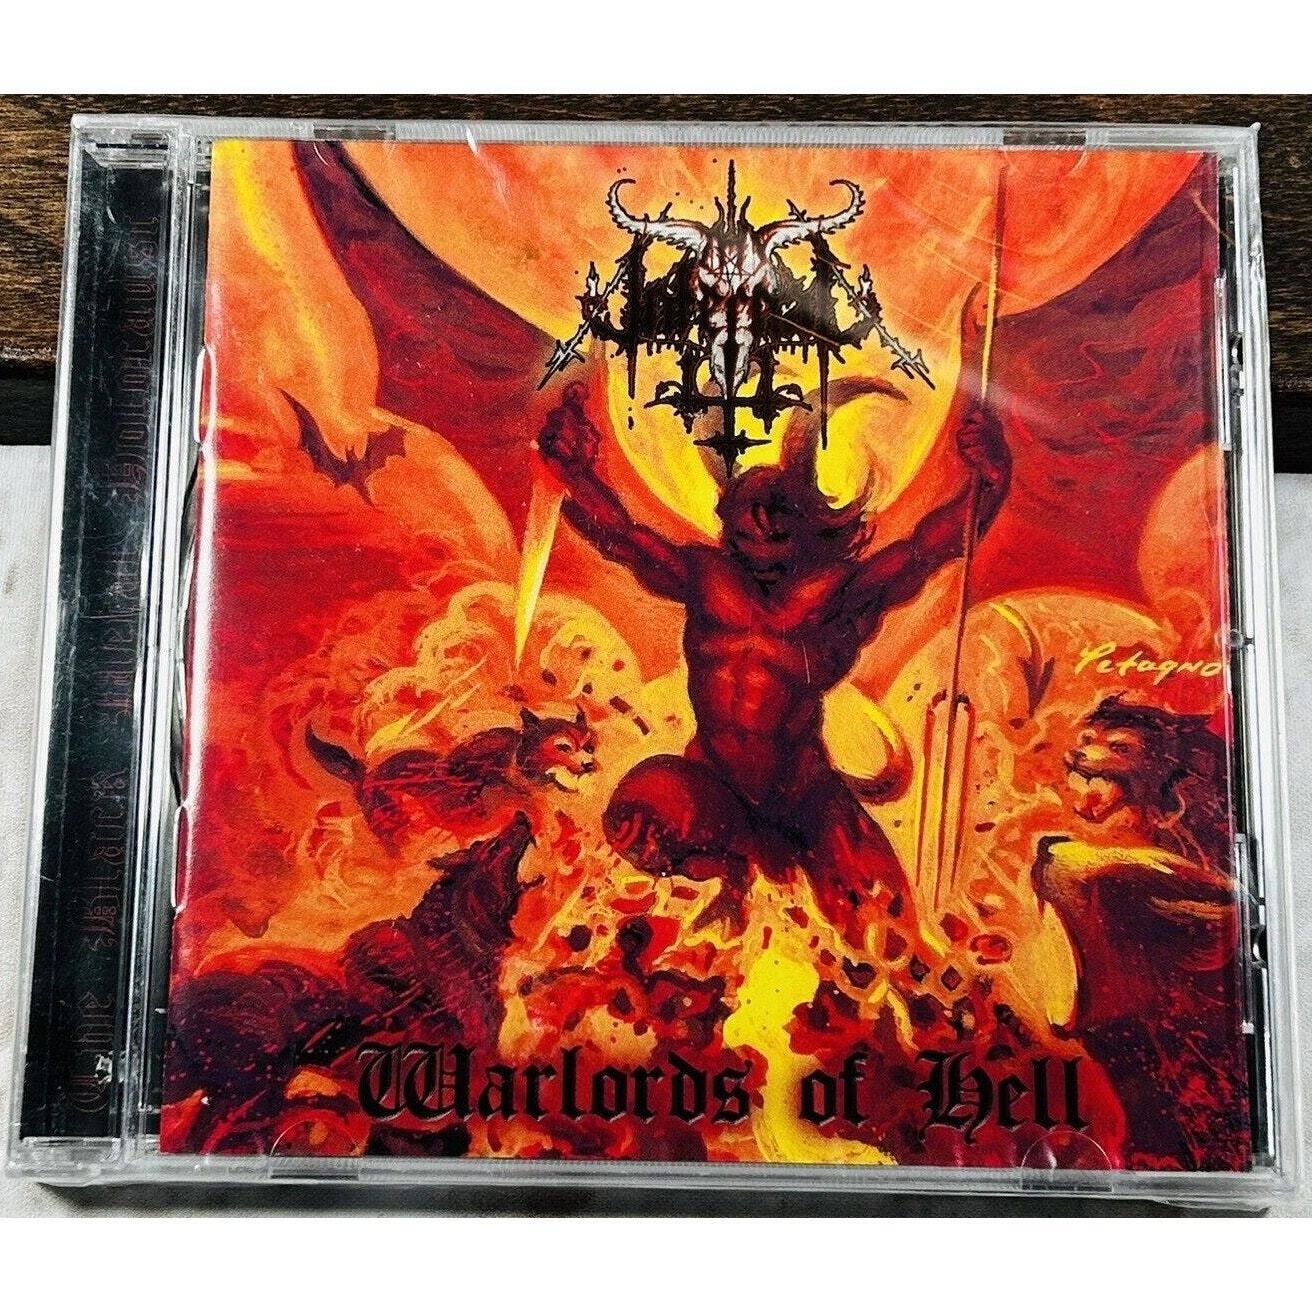 Warlords of Hell by Thy Infernal CD 2013 new with hole punch